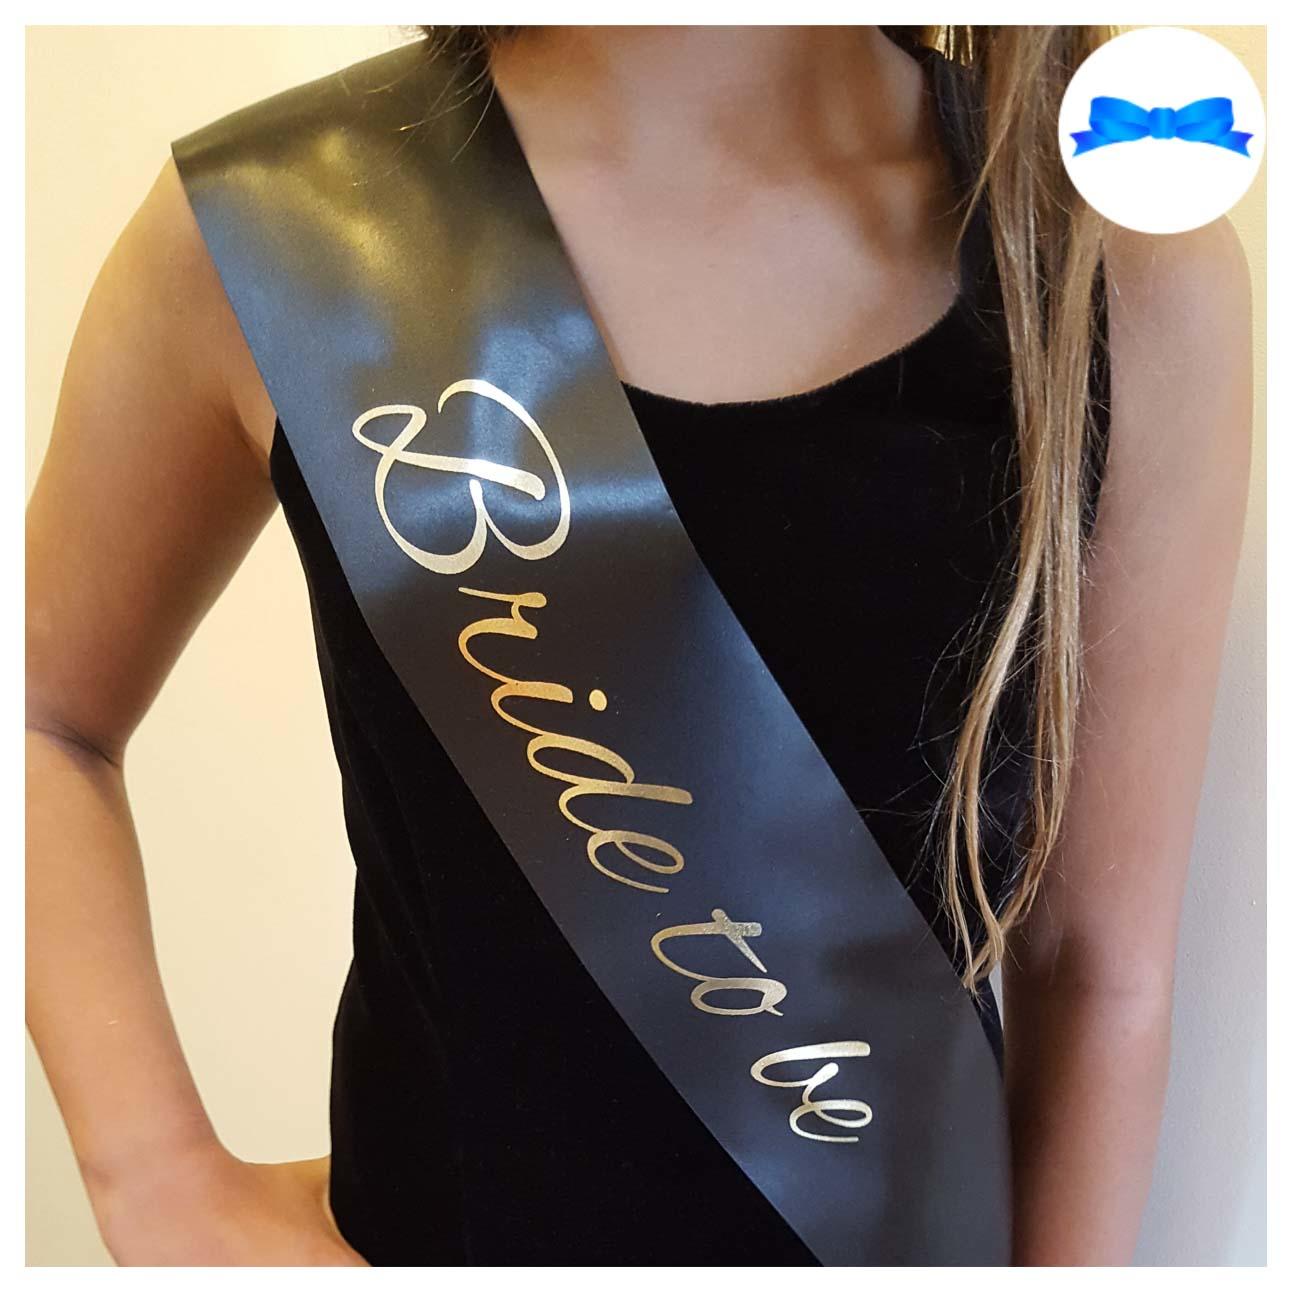 Black and gold bride to be personalised sash